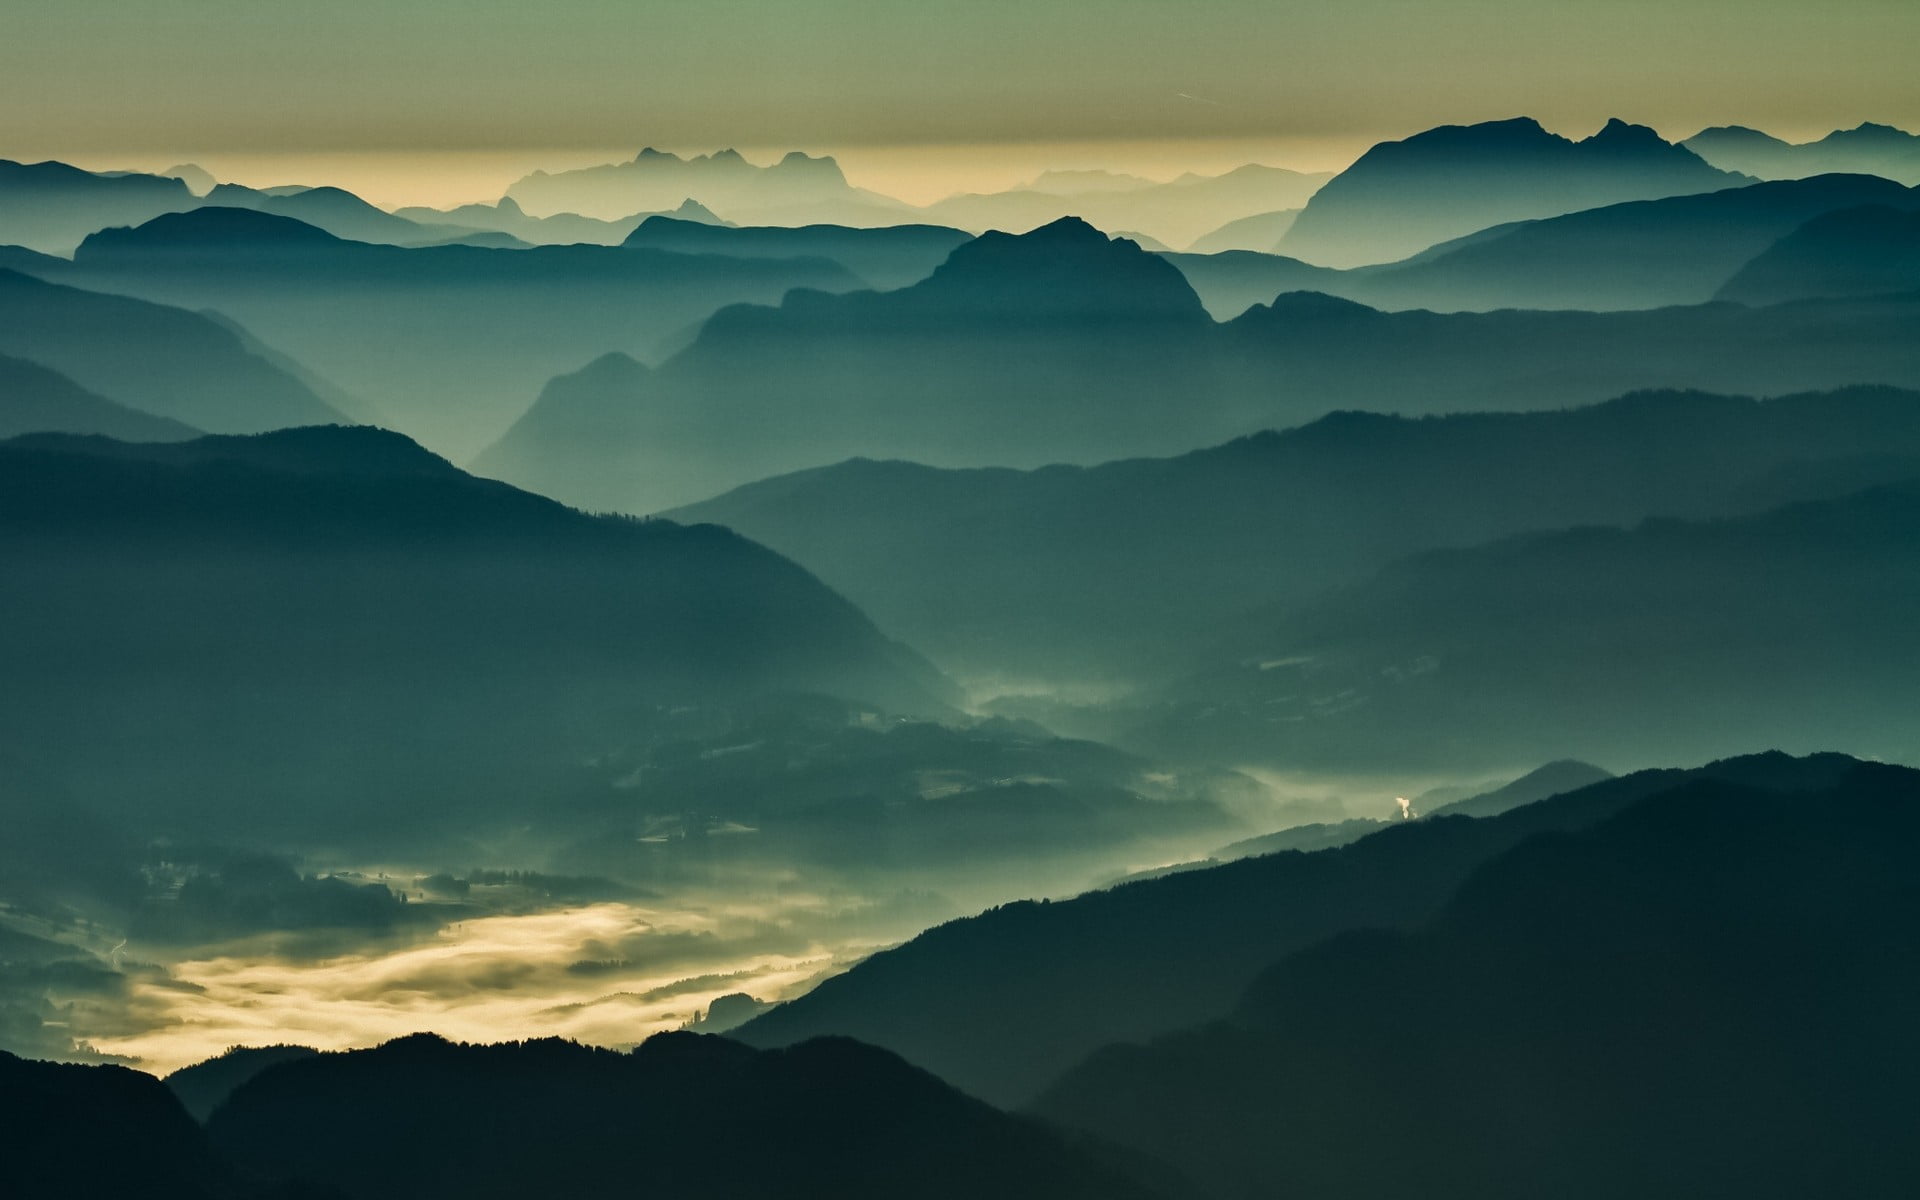 silhouette of mountains, nature, landscape, mist, mountains